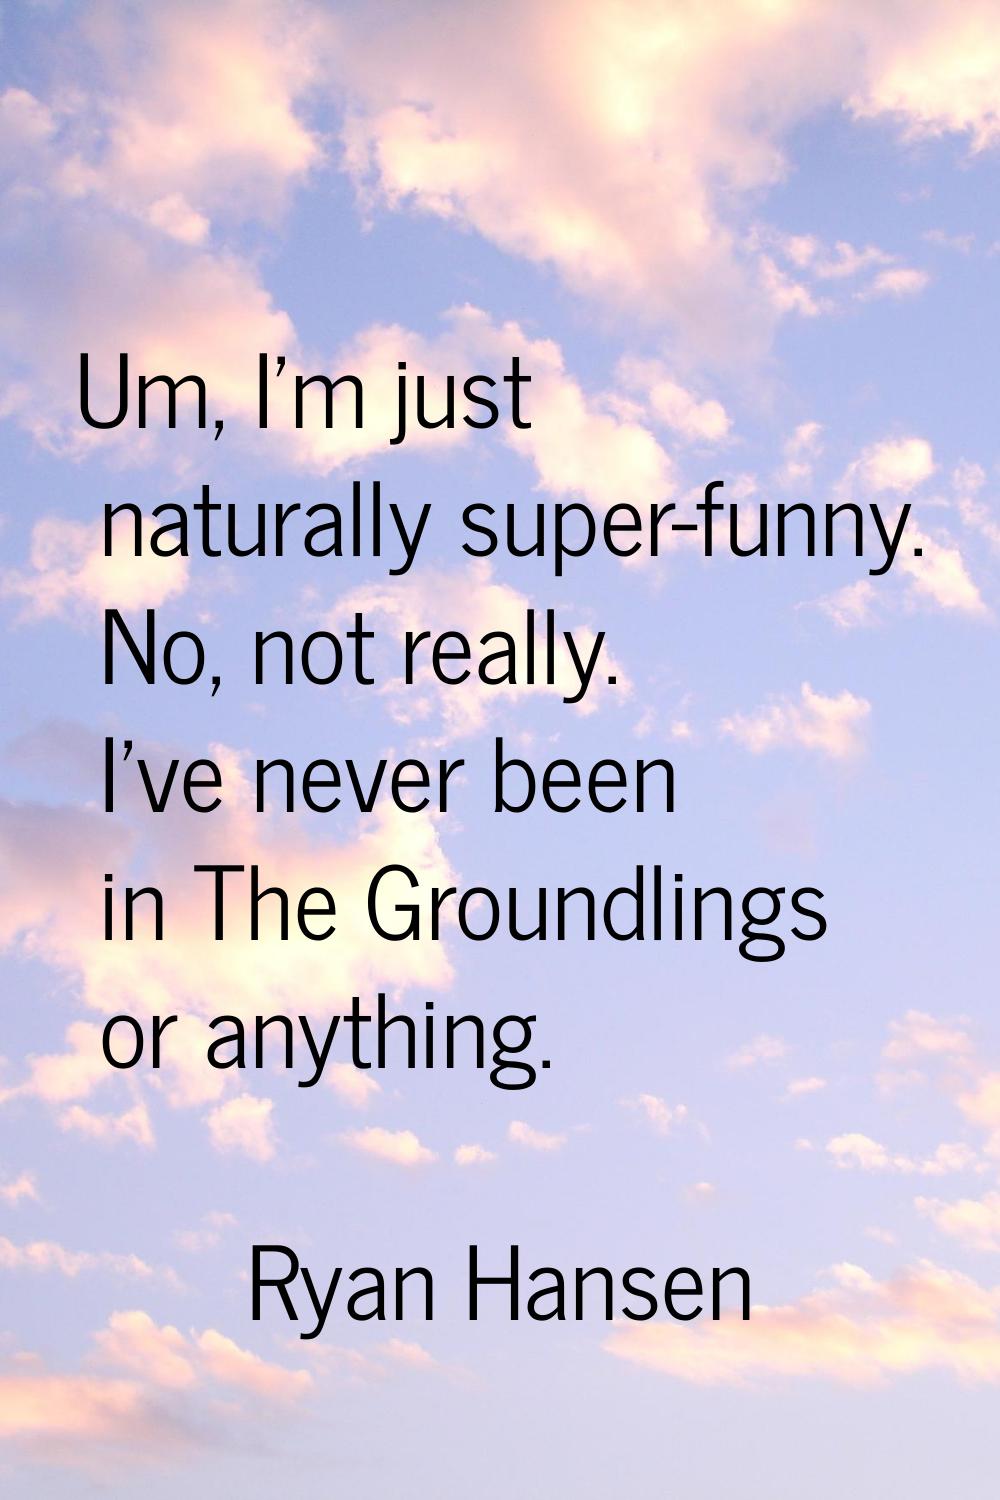 Um, I'm just naturally super-funny. No, not really. I've never been in The Groundlings or anything.